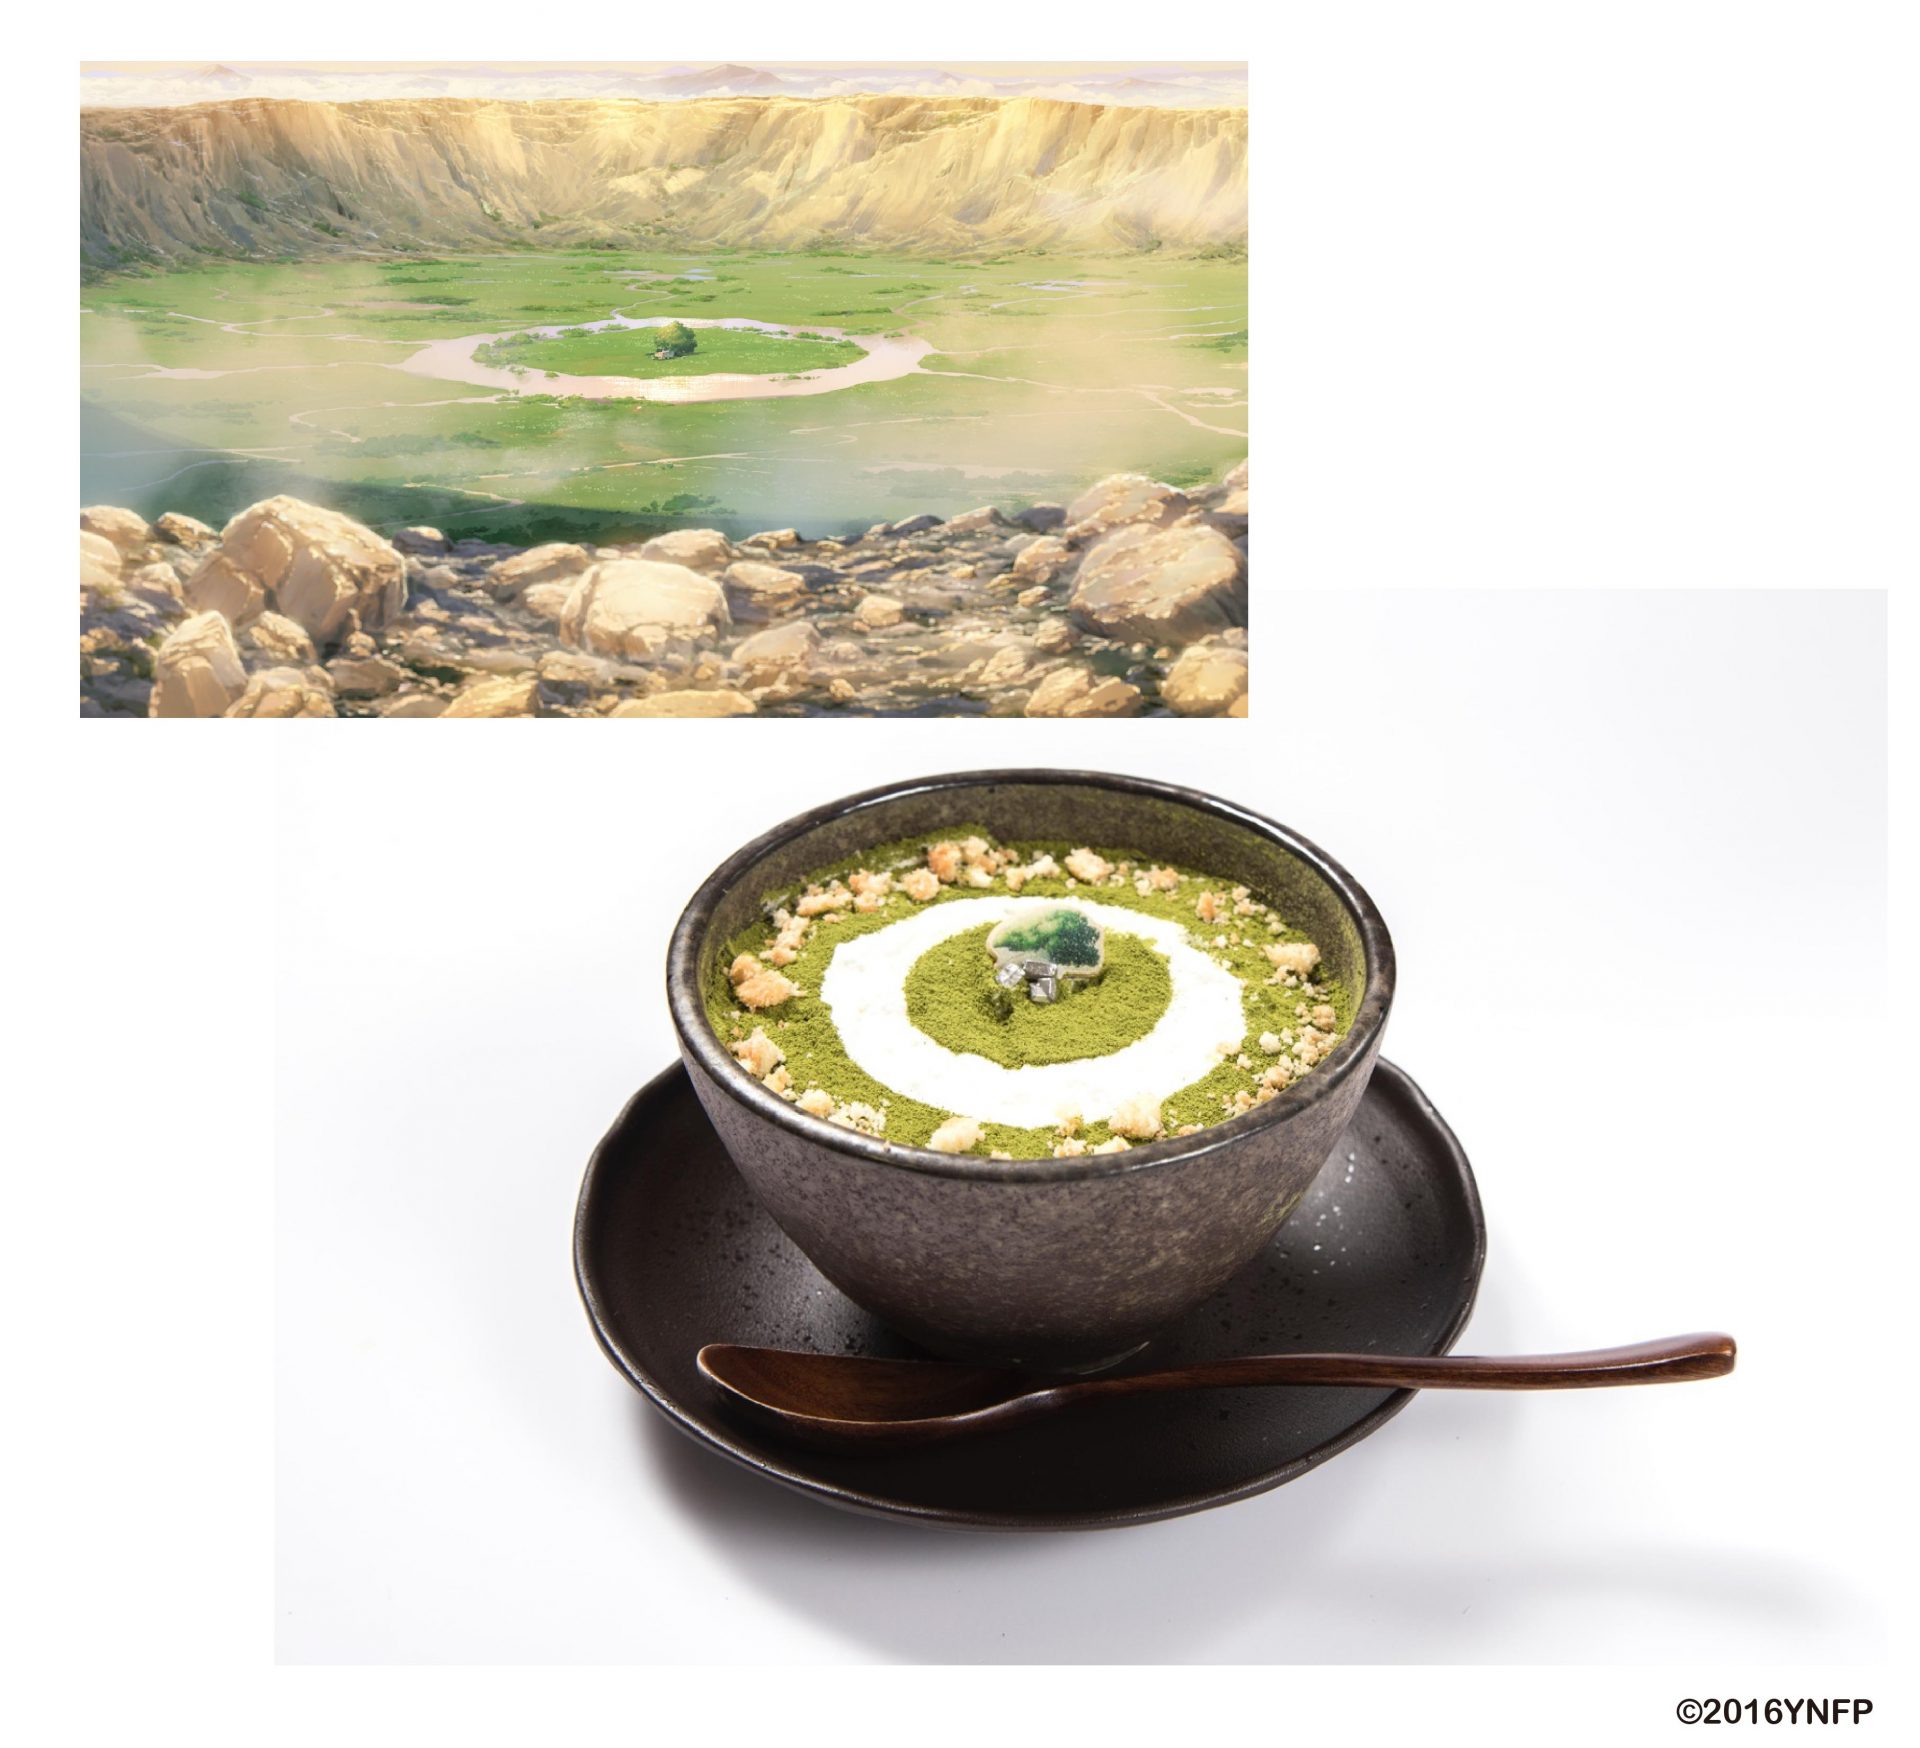 Matcha Parfait - the summit where the body of the god was enshrined -